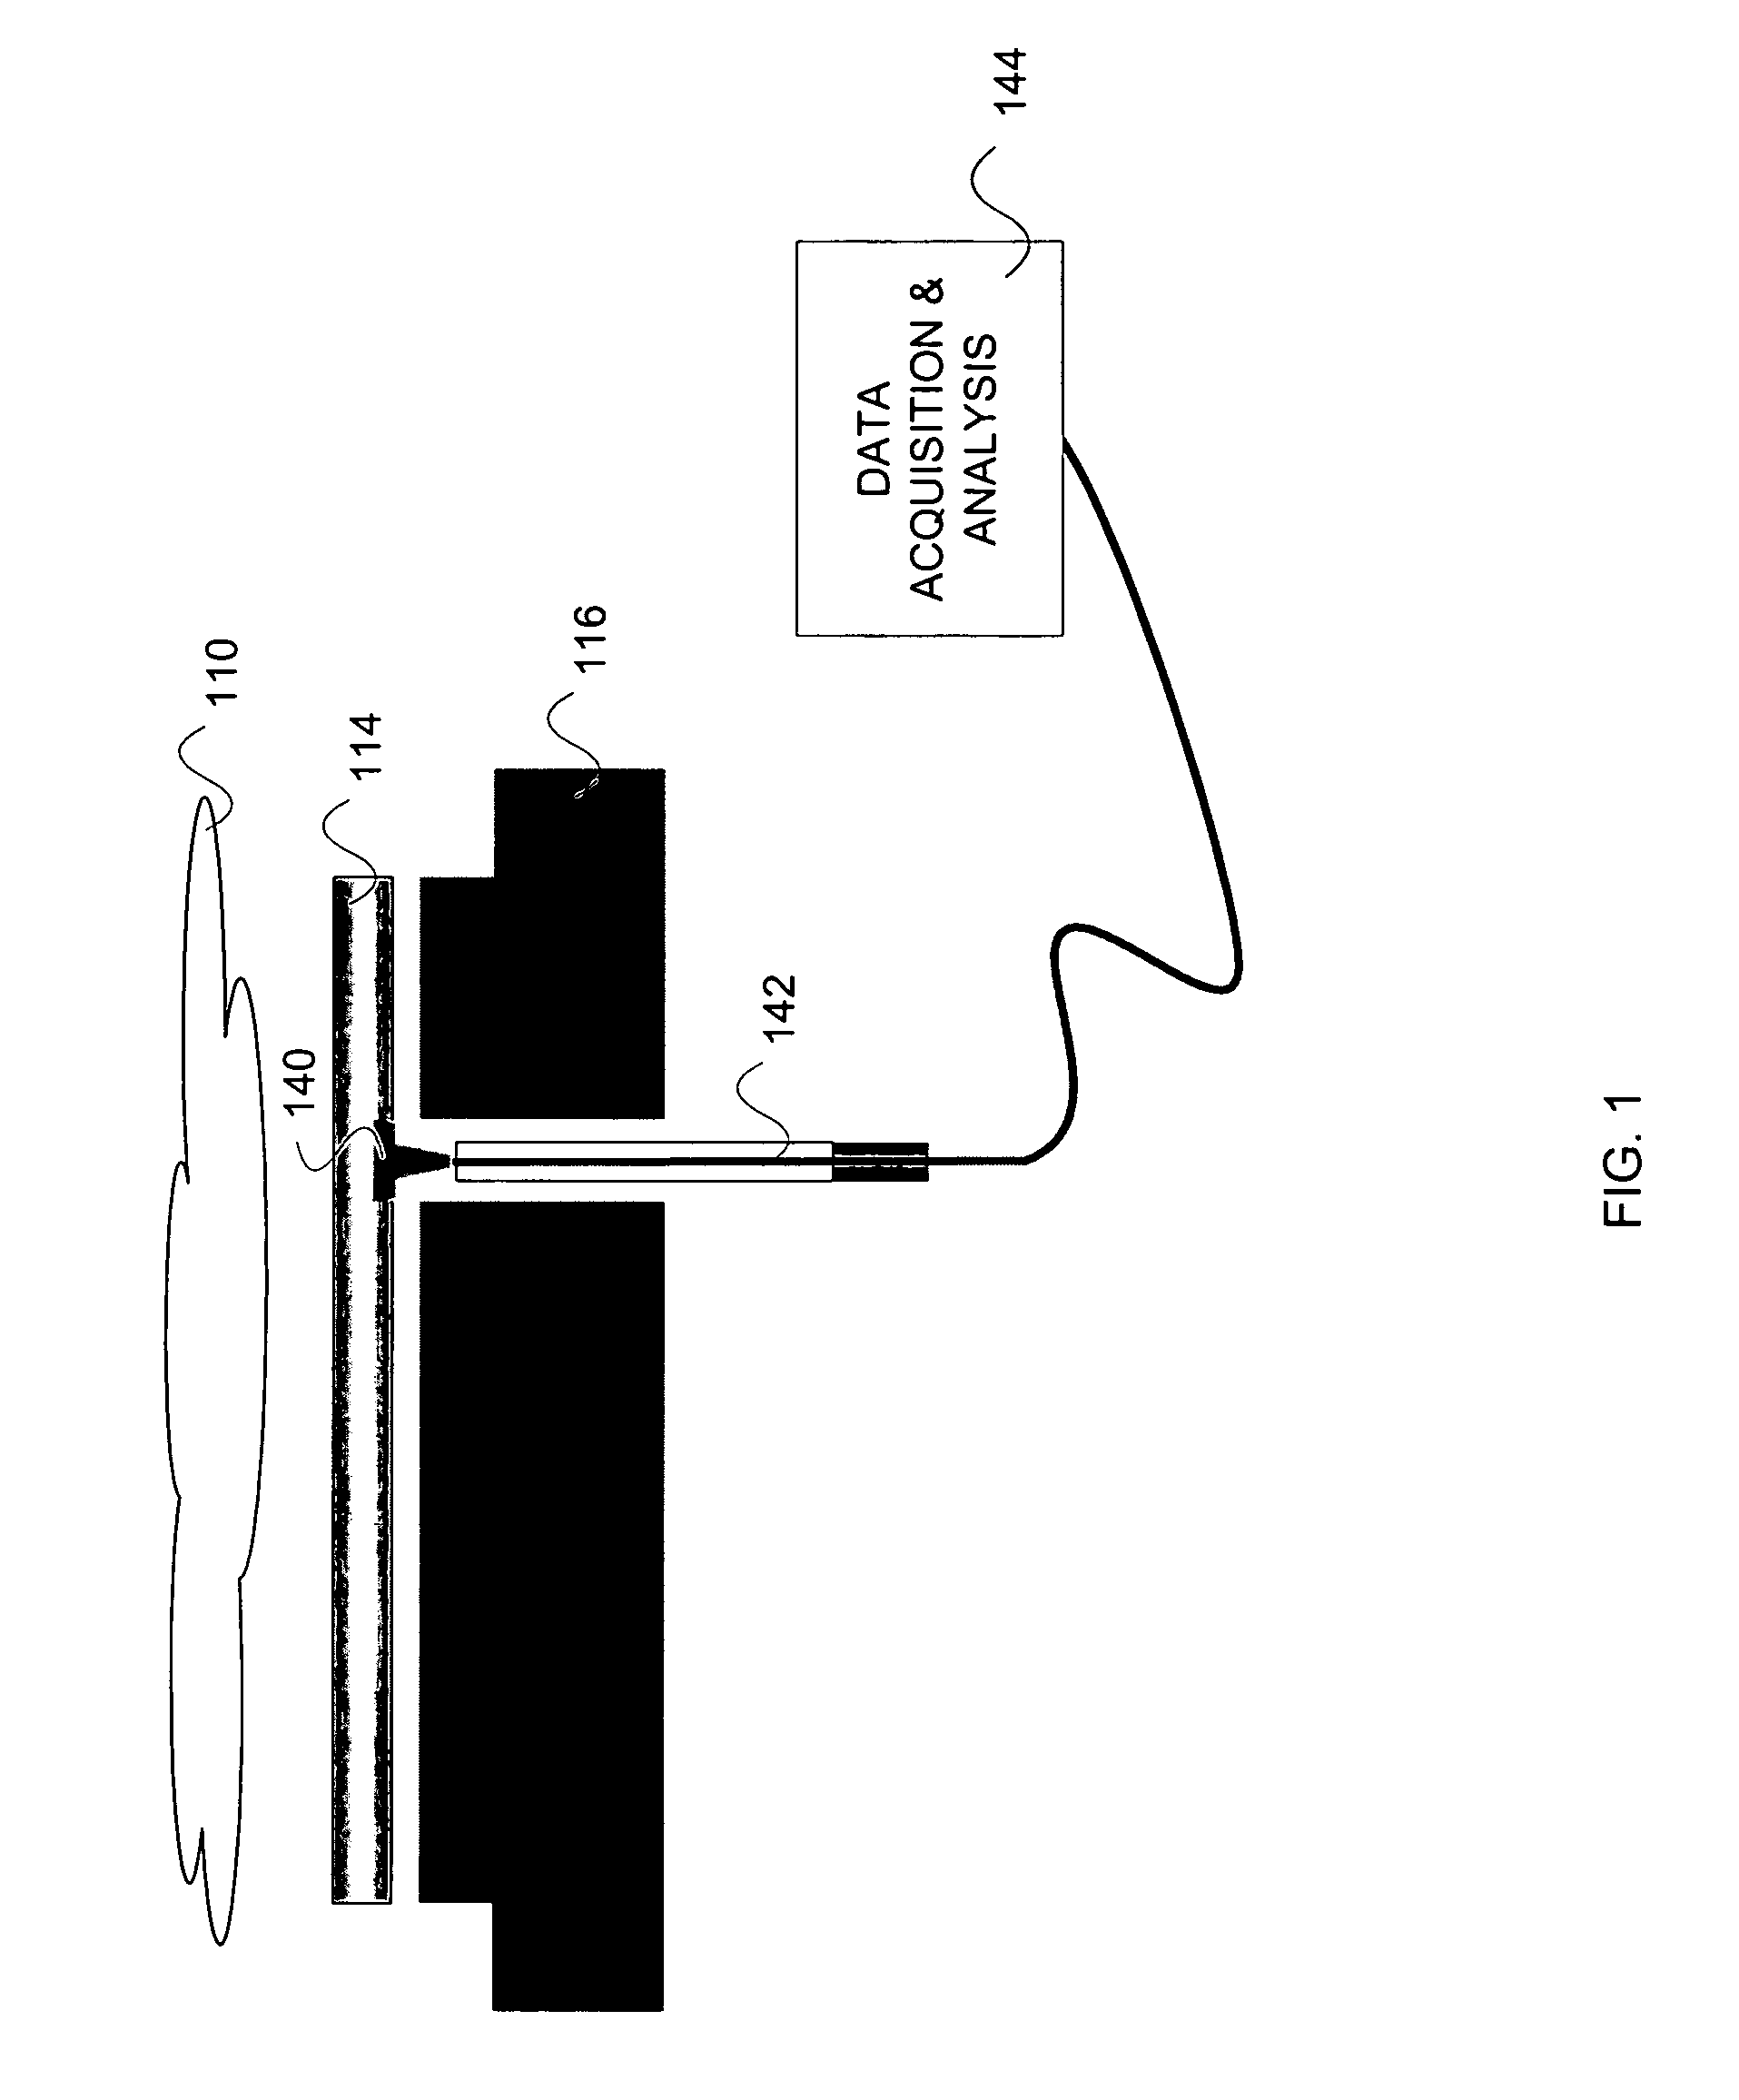 Apparatus for determining a temperature of a substrate and methods therefor